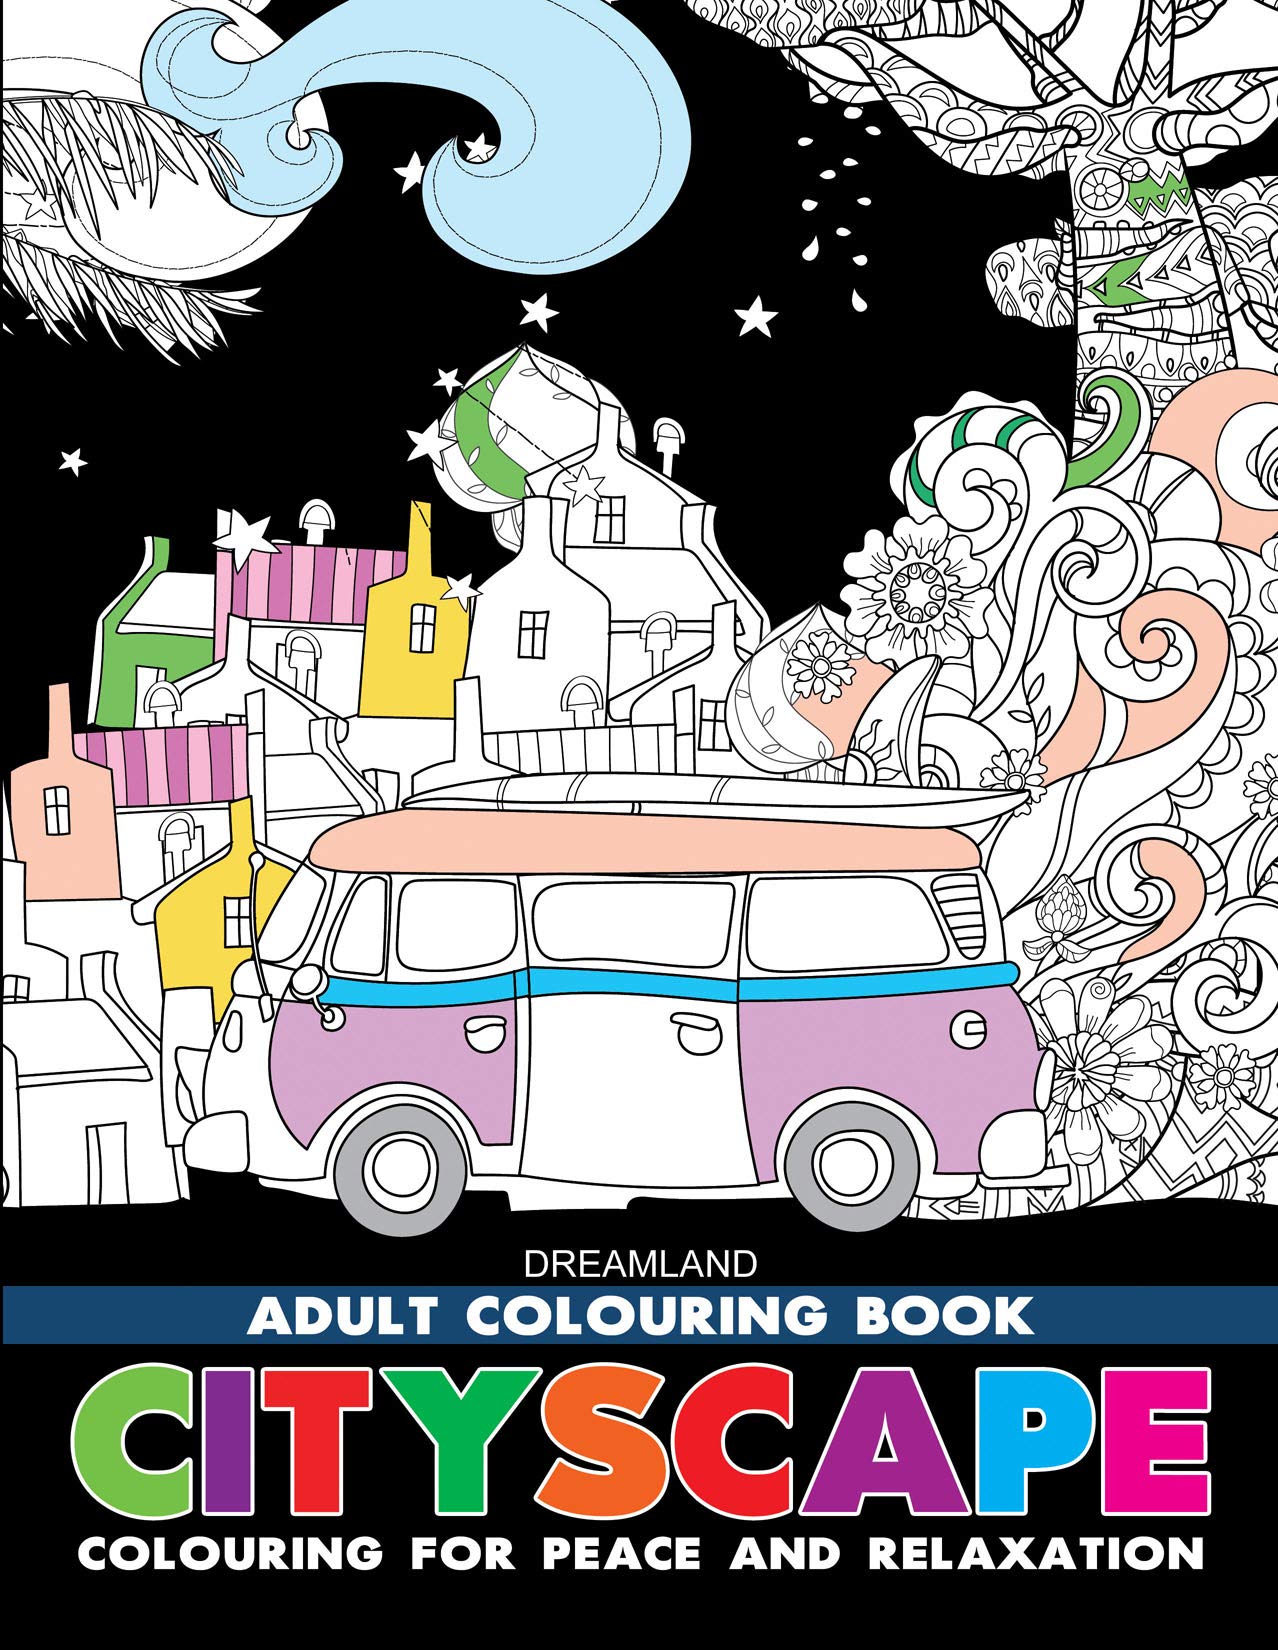 Cityscape - Adult Colouring Book for Peace & Relaxation